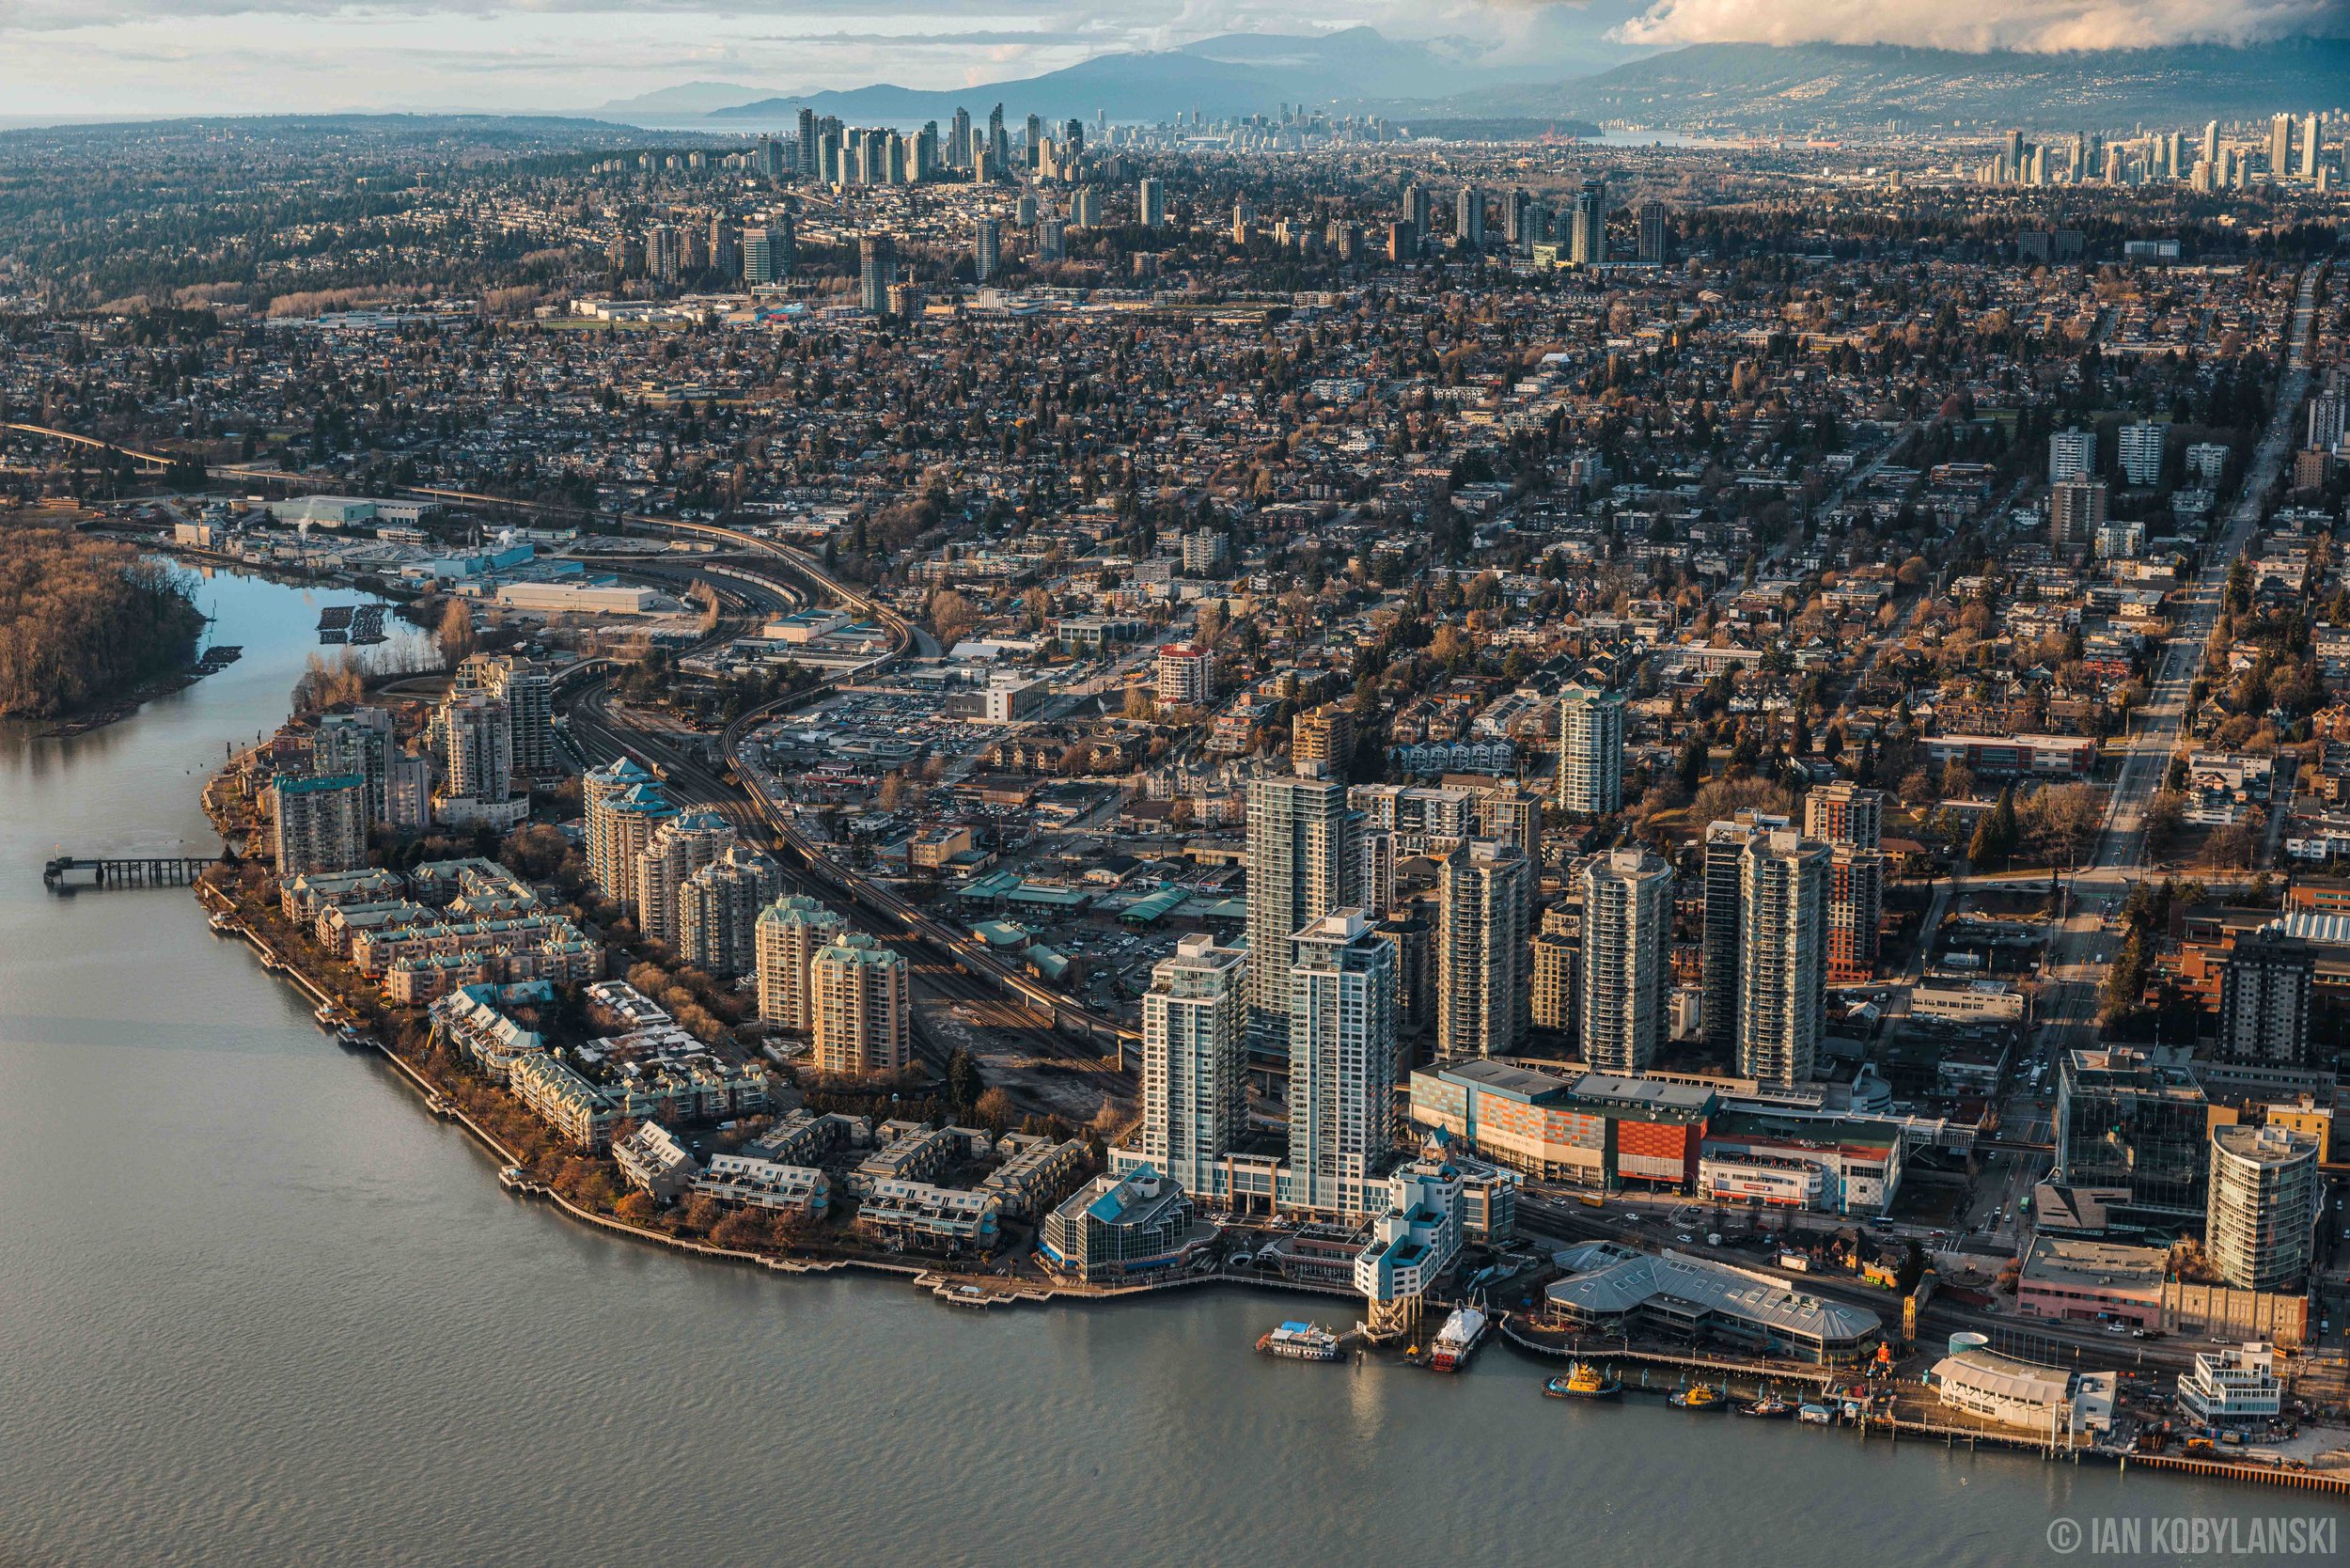   “New Westminster Skyline” . Where I was born. This aerial view of New Westminster from 2023 captures the waters and piers of the New Westminster Quay, the whole length of Eighth Street, and visibility to Surrey, Burnaby, the downtown Vancouver skyl